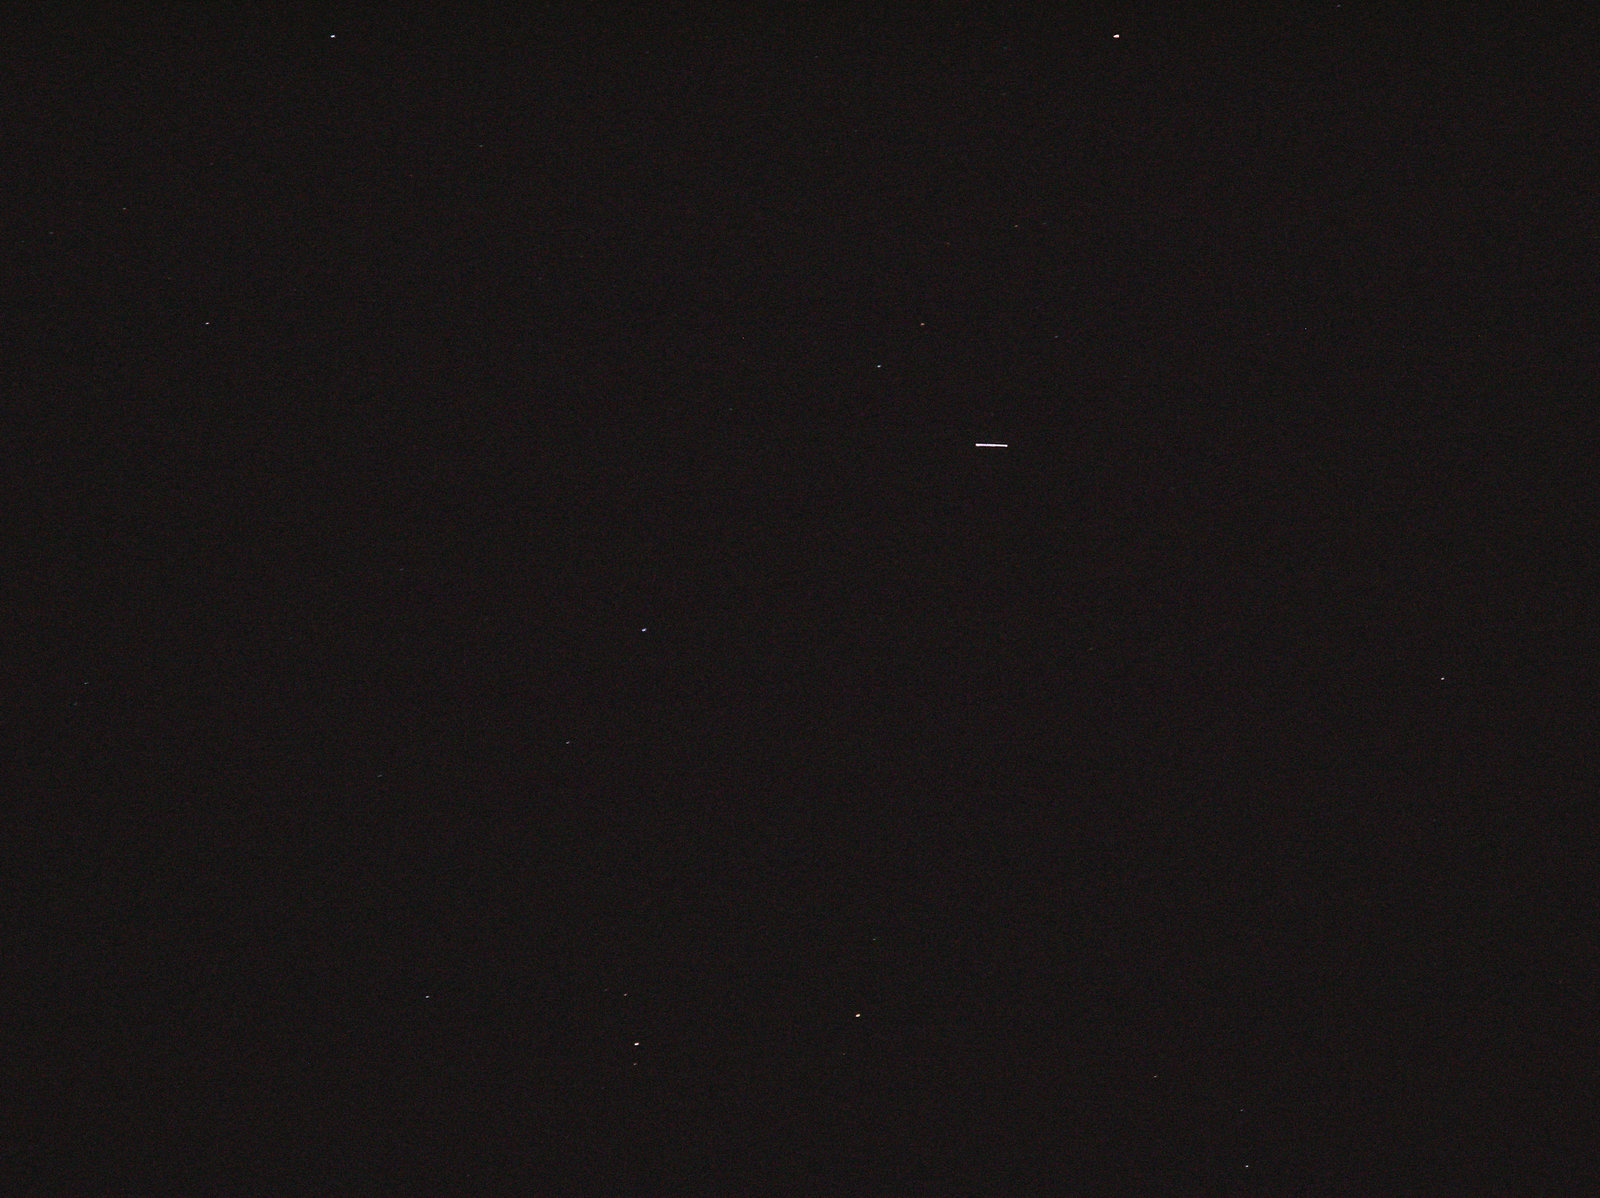 An eighth of a second of the ISS